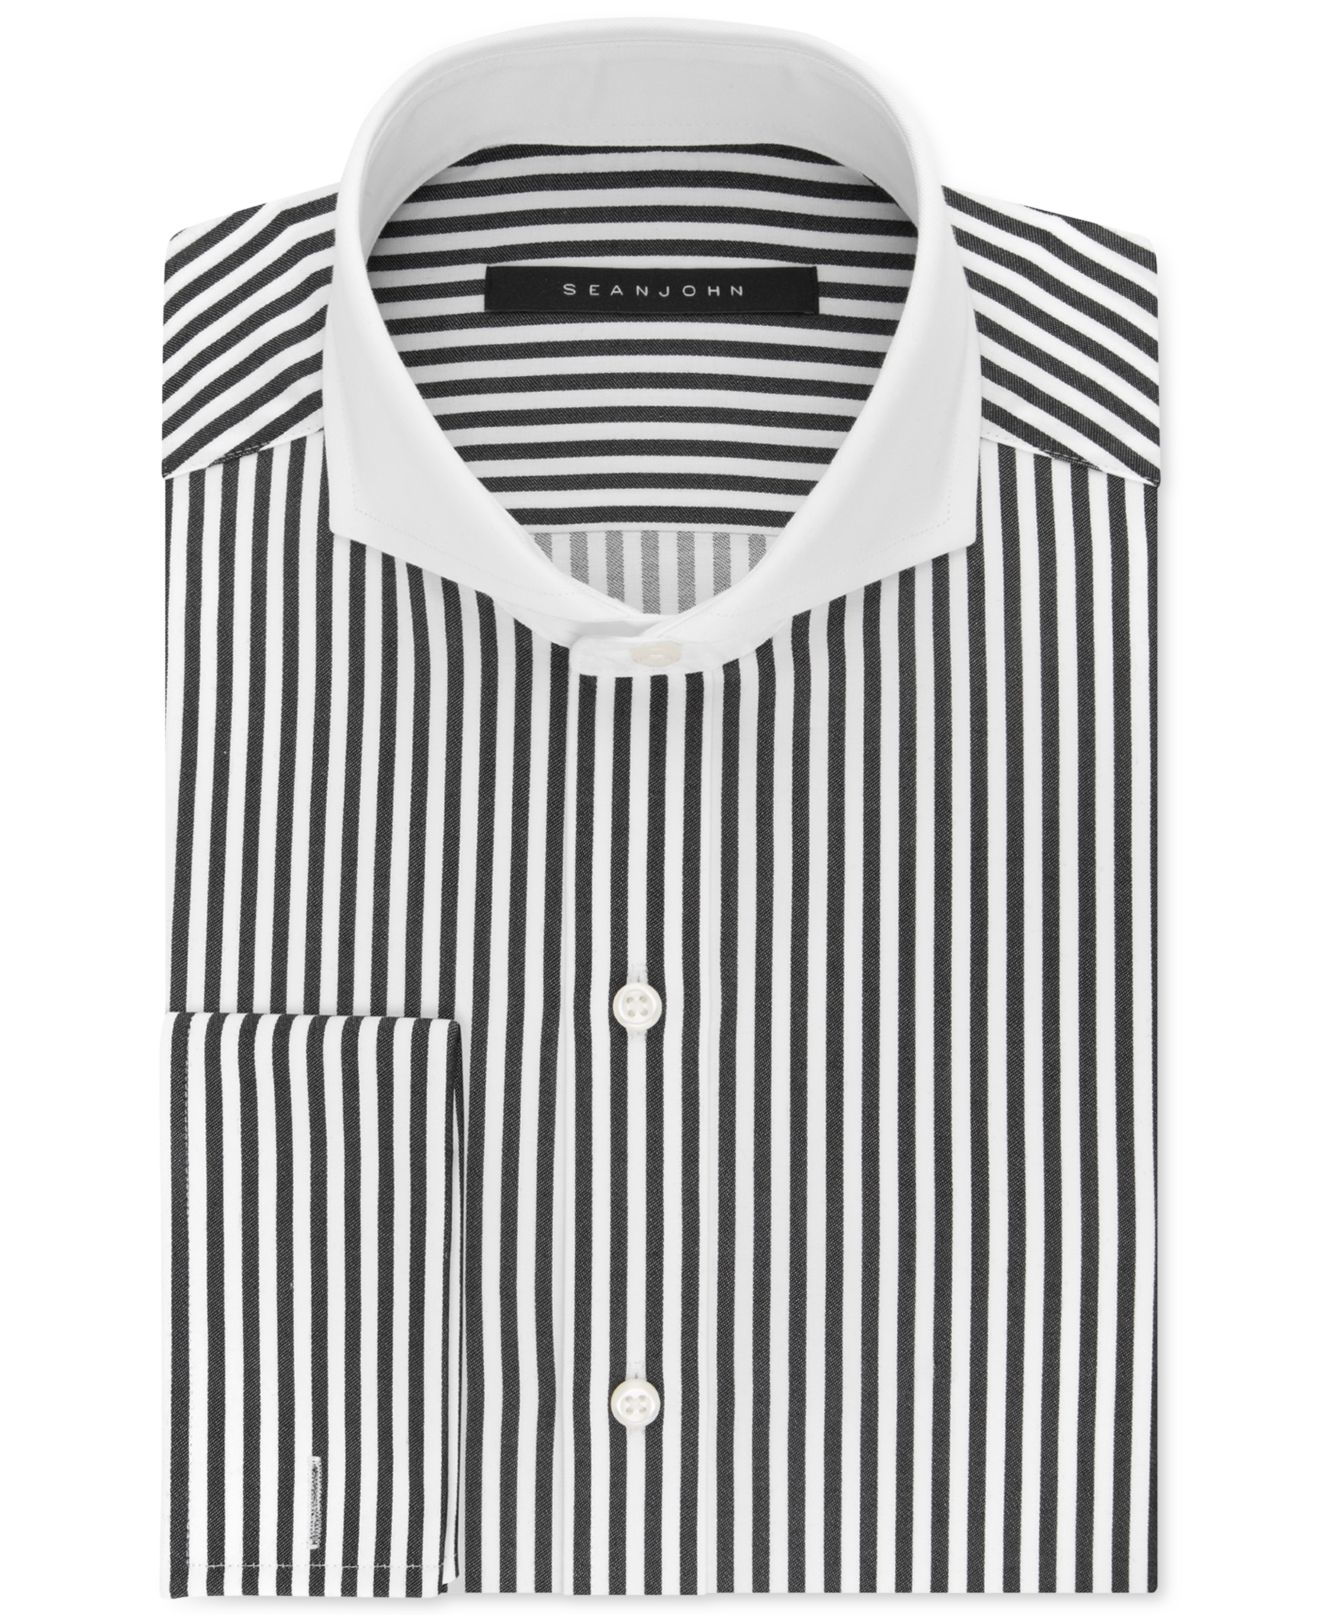 Black And White Striped Long Sleeve Shirt Mens | estudioespositoymiguel ...